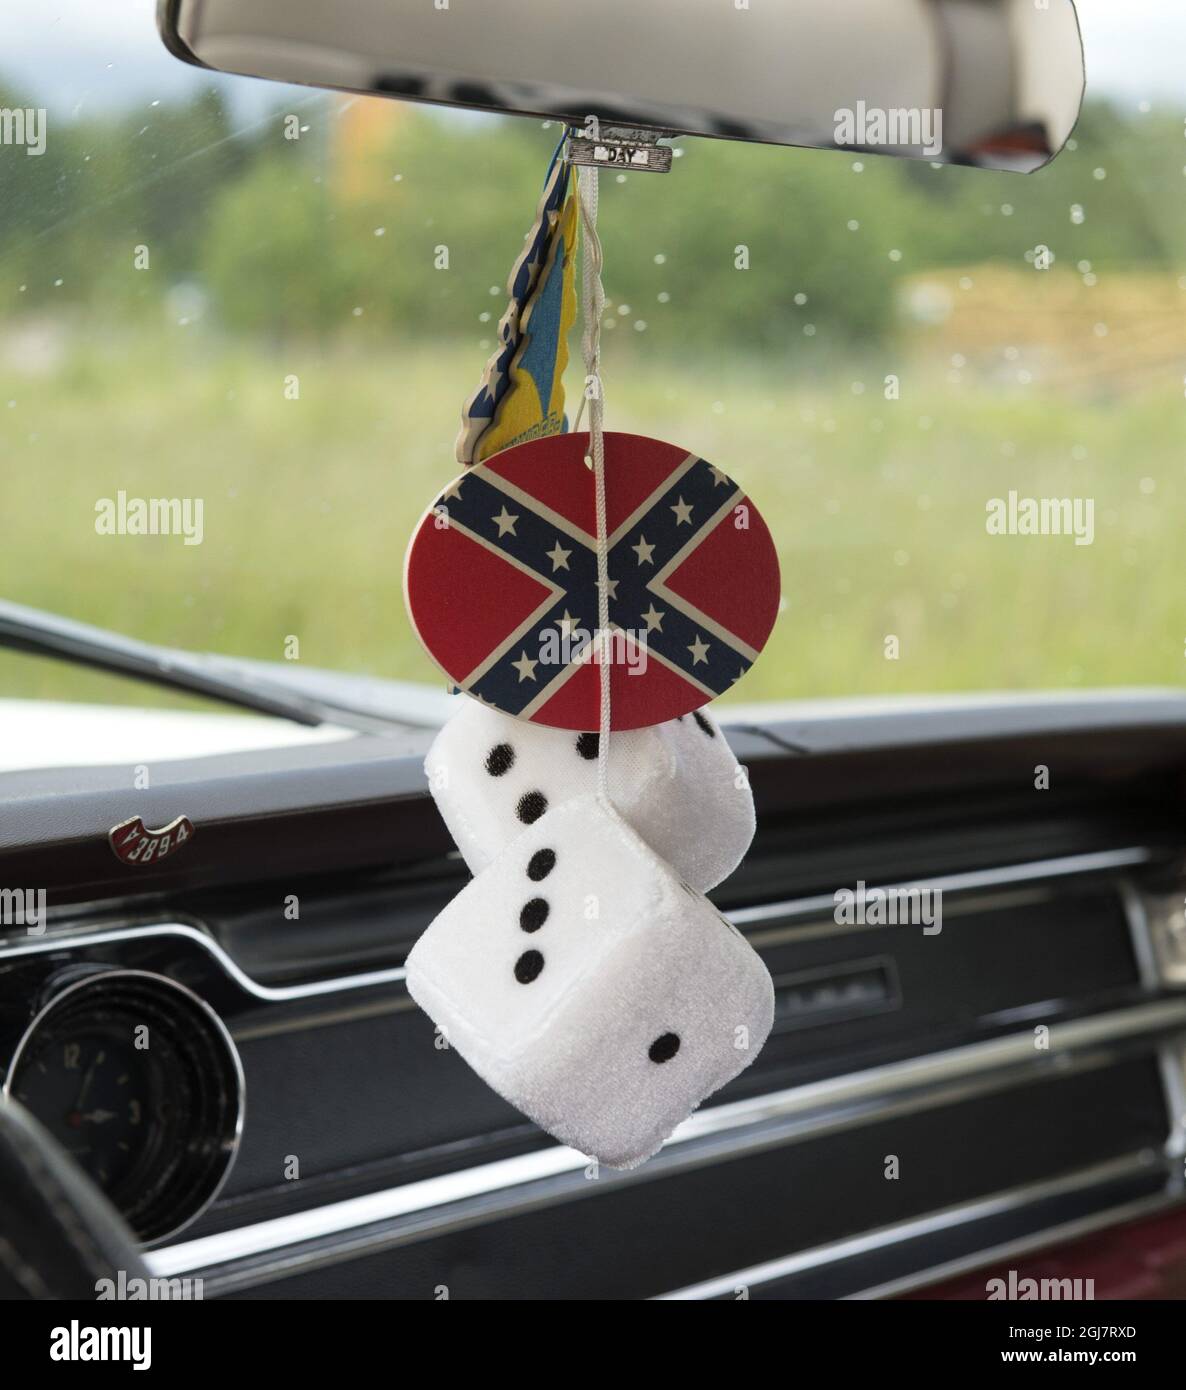 Fuzzy Dice Hanging From a Rear-View Mirror in Vintage Car Stock